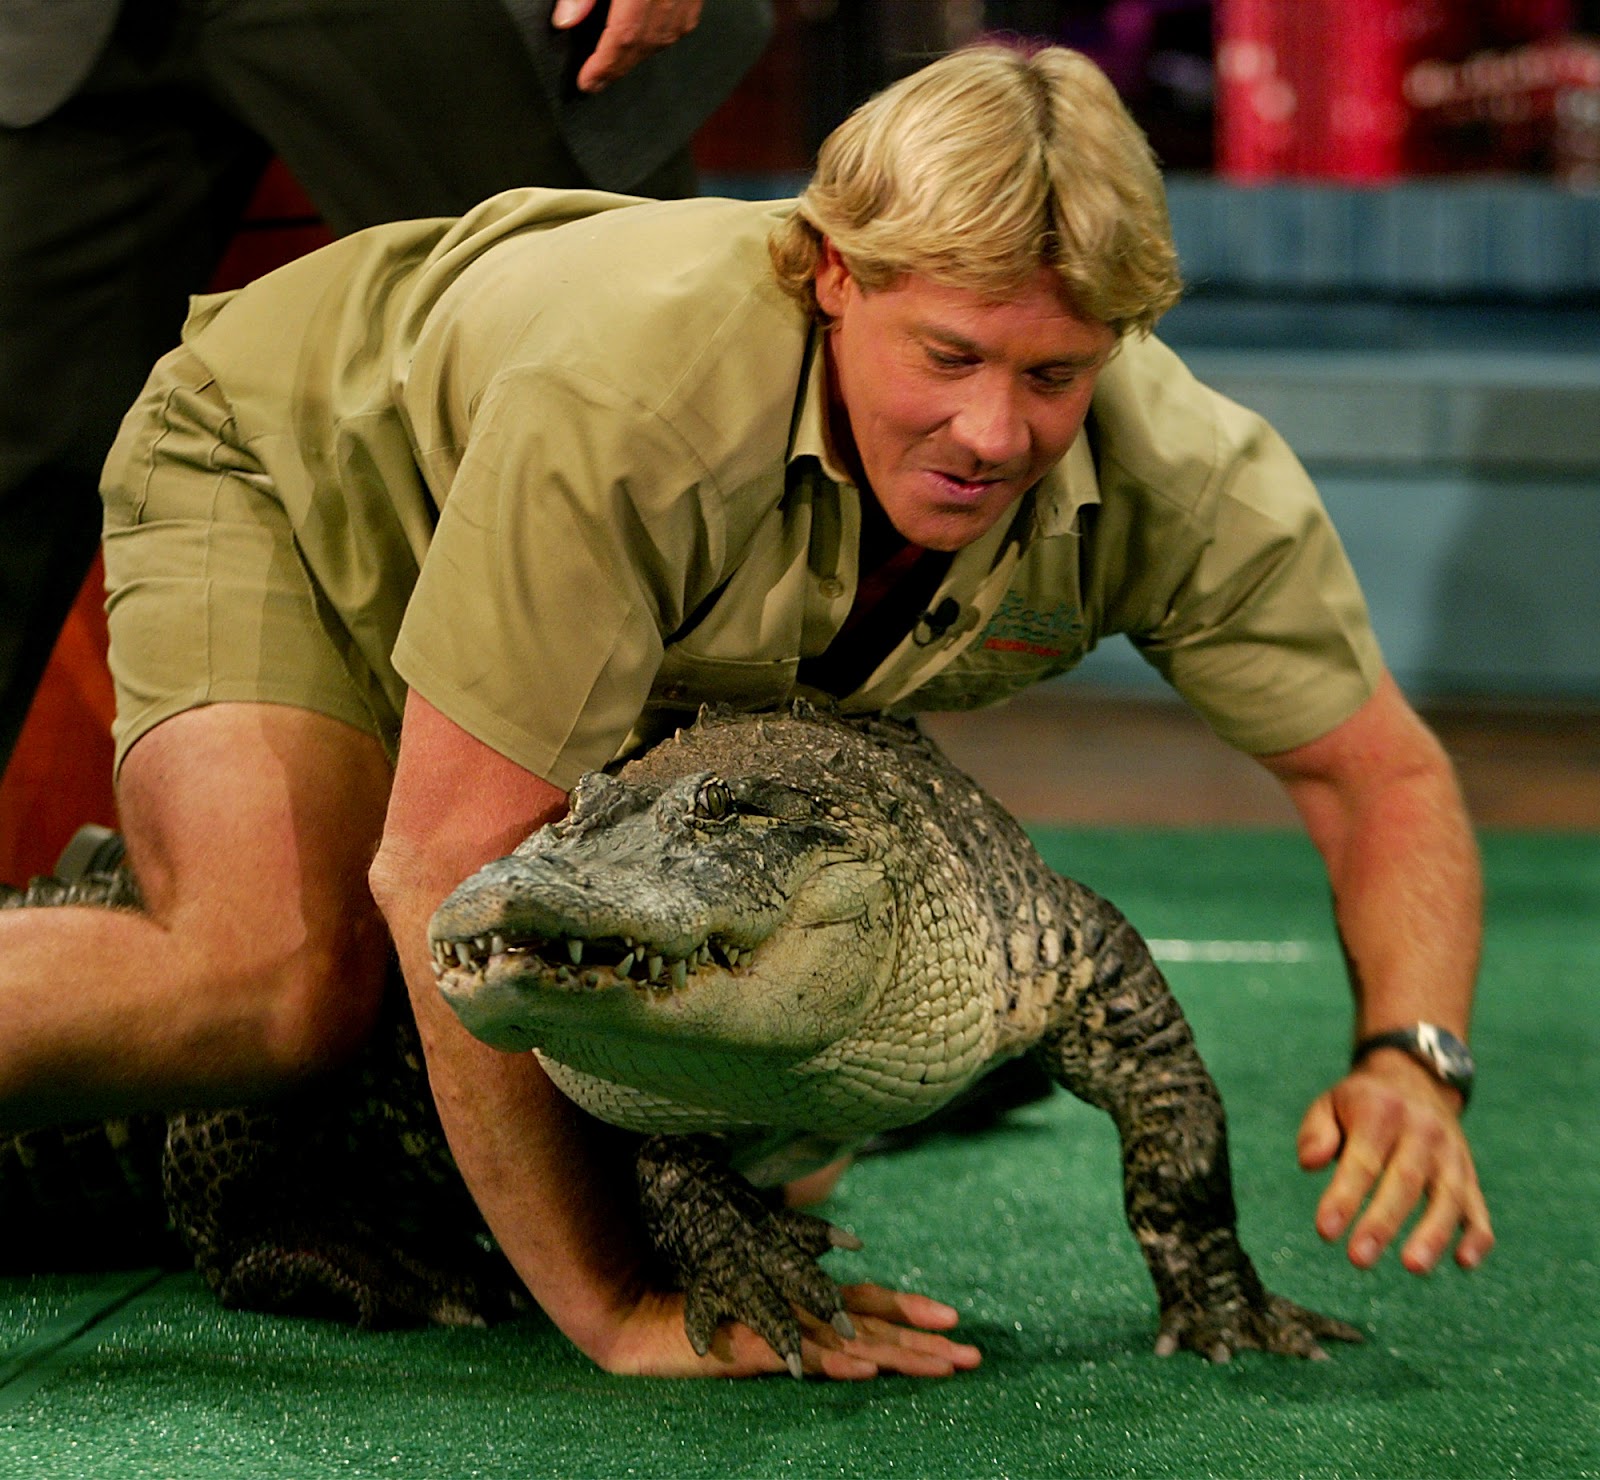 Steve Irwin with a live alligator in 2002. | Source: Getty Images